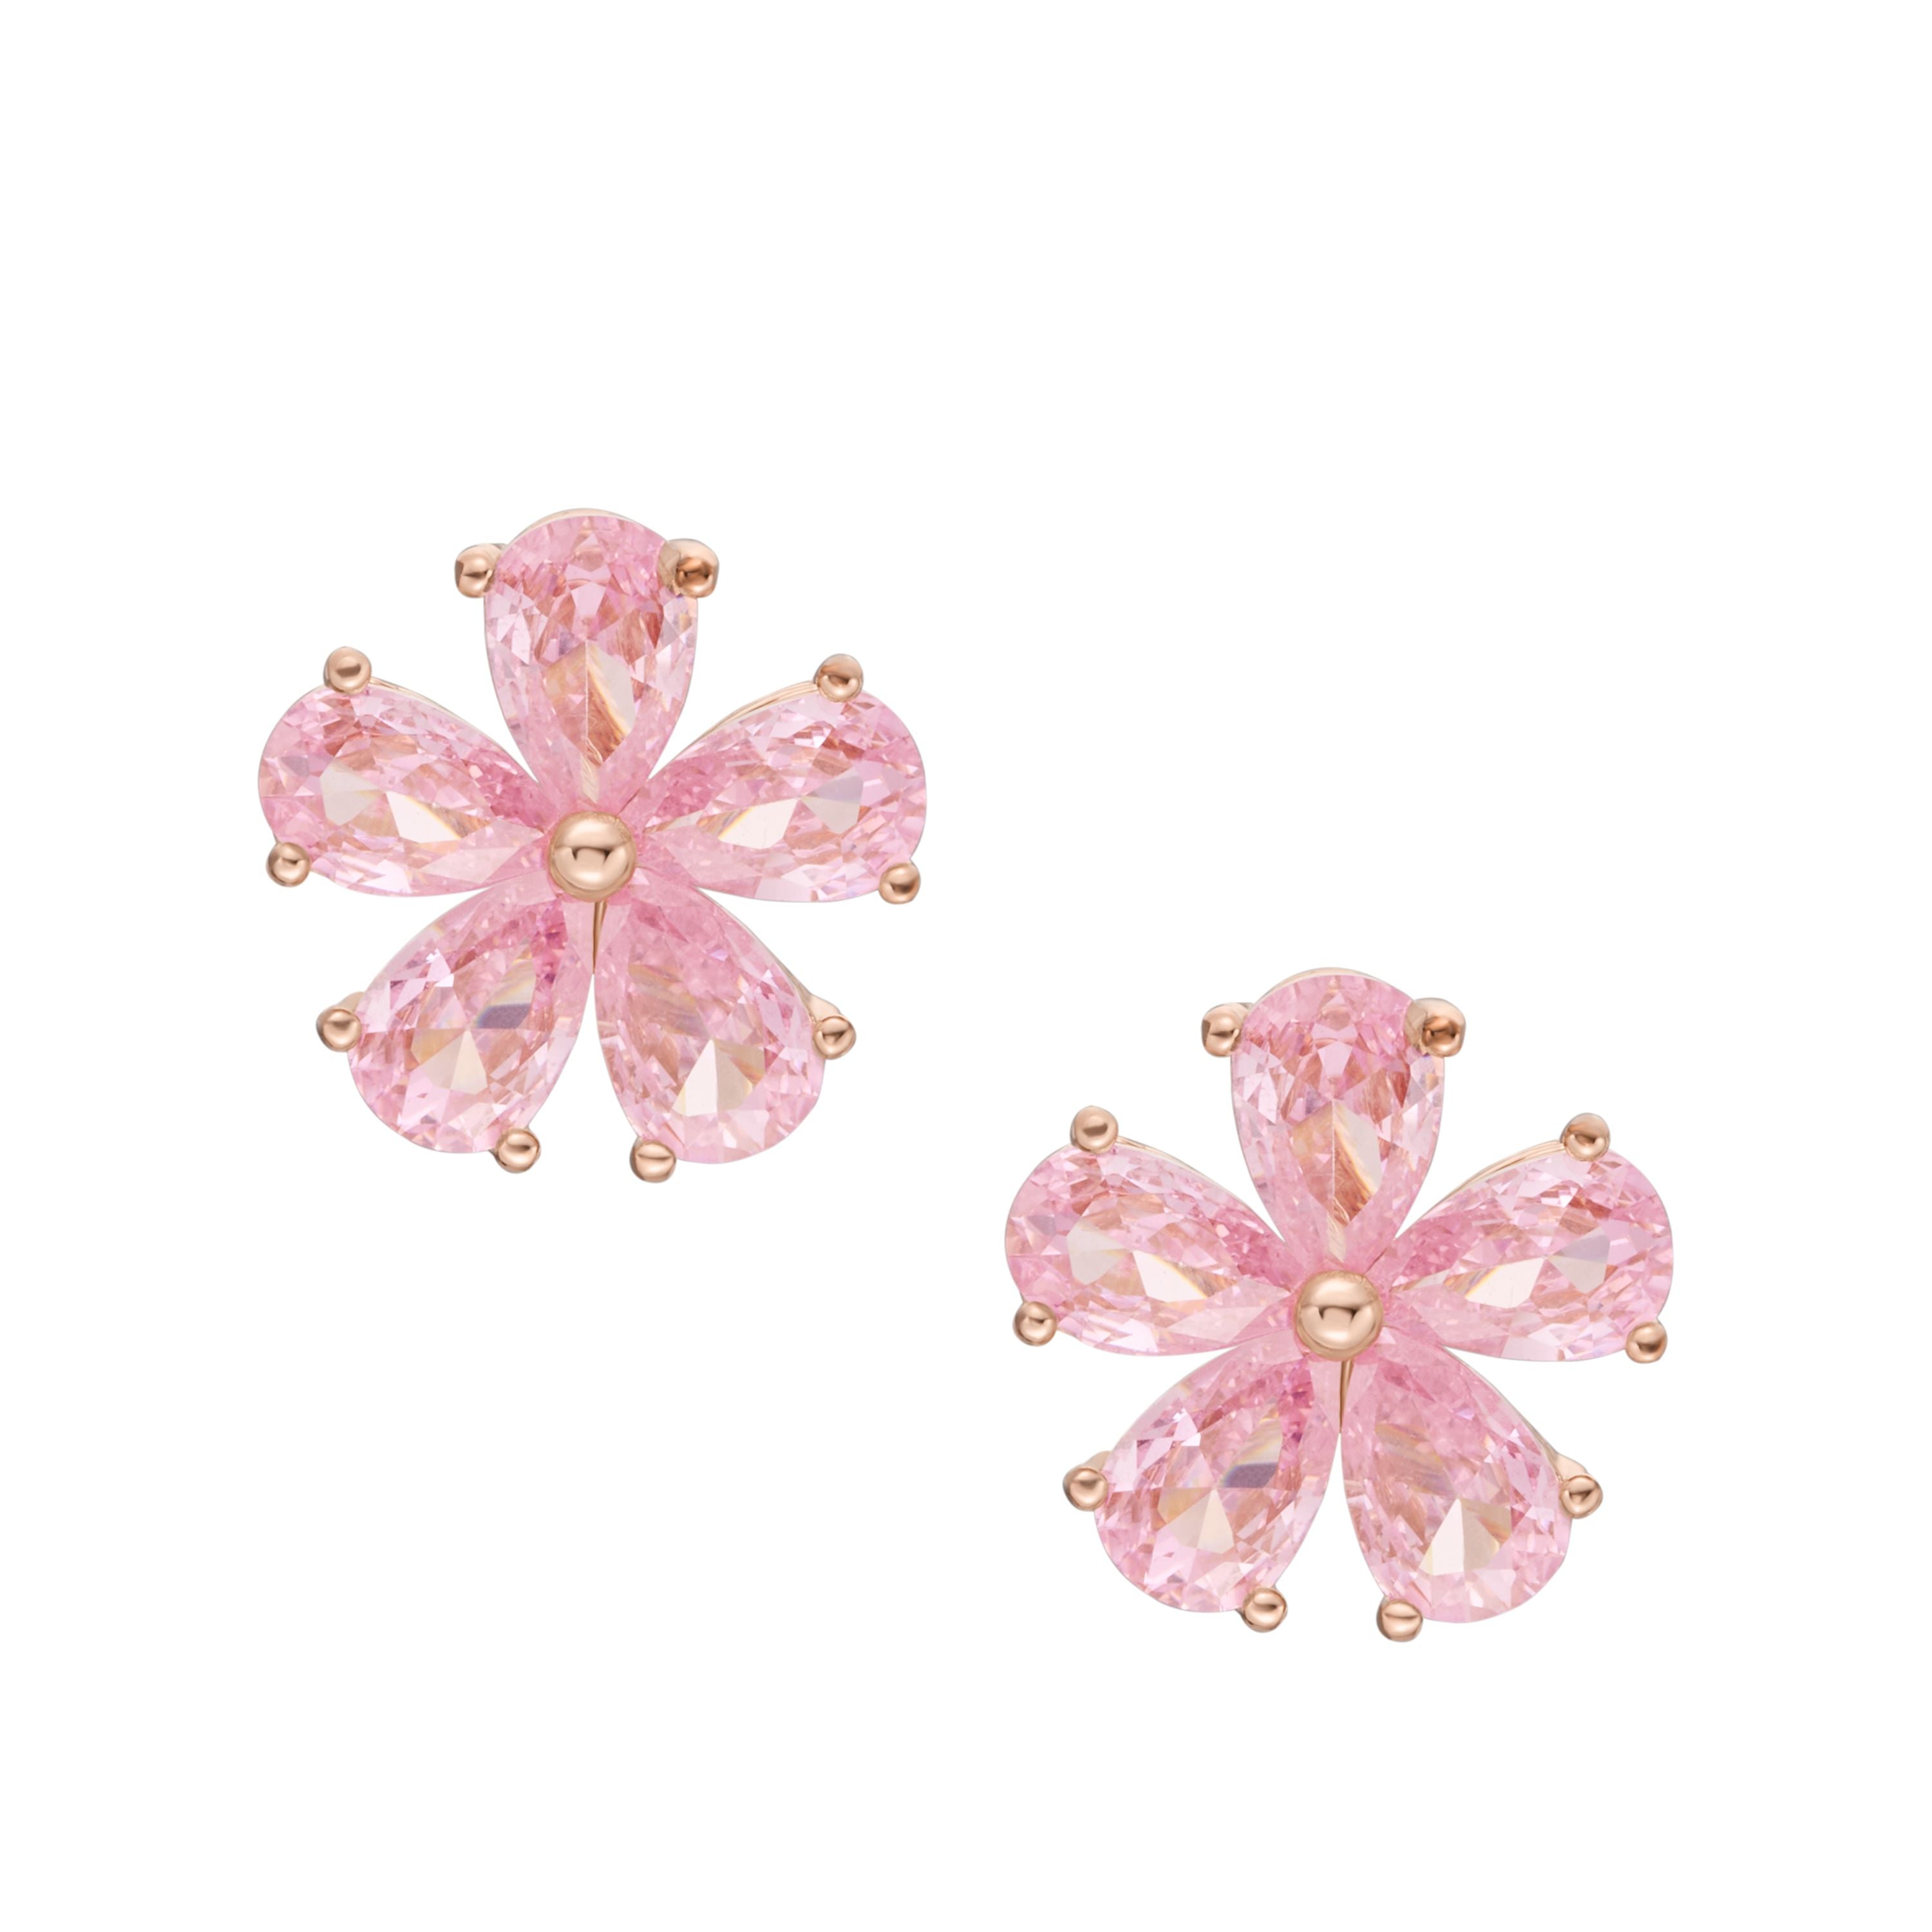 Fossil Women's Garden Party Pink Crystals Stud Earrings